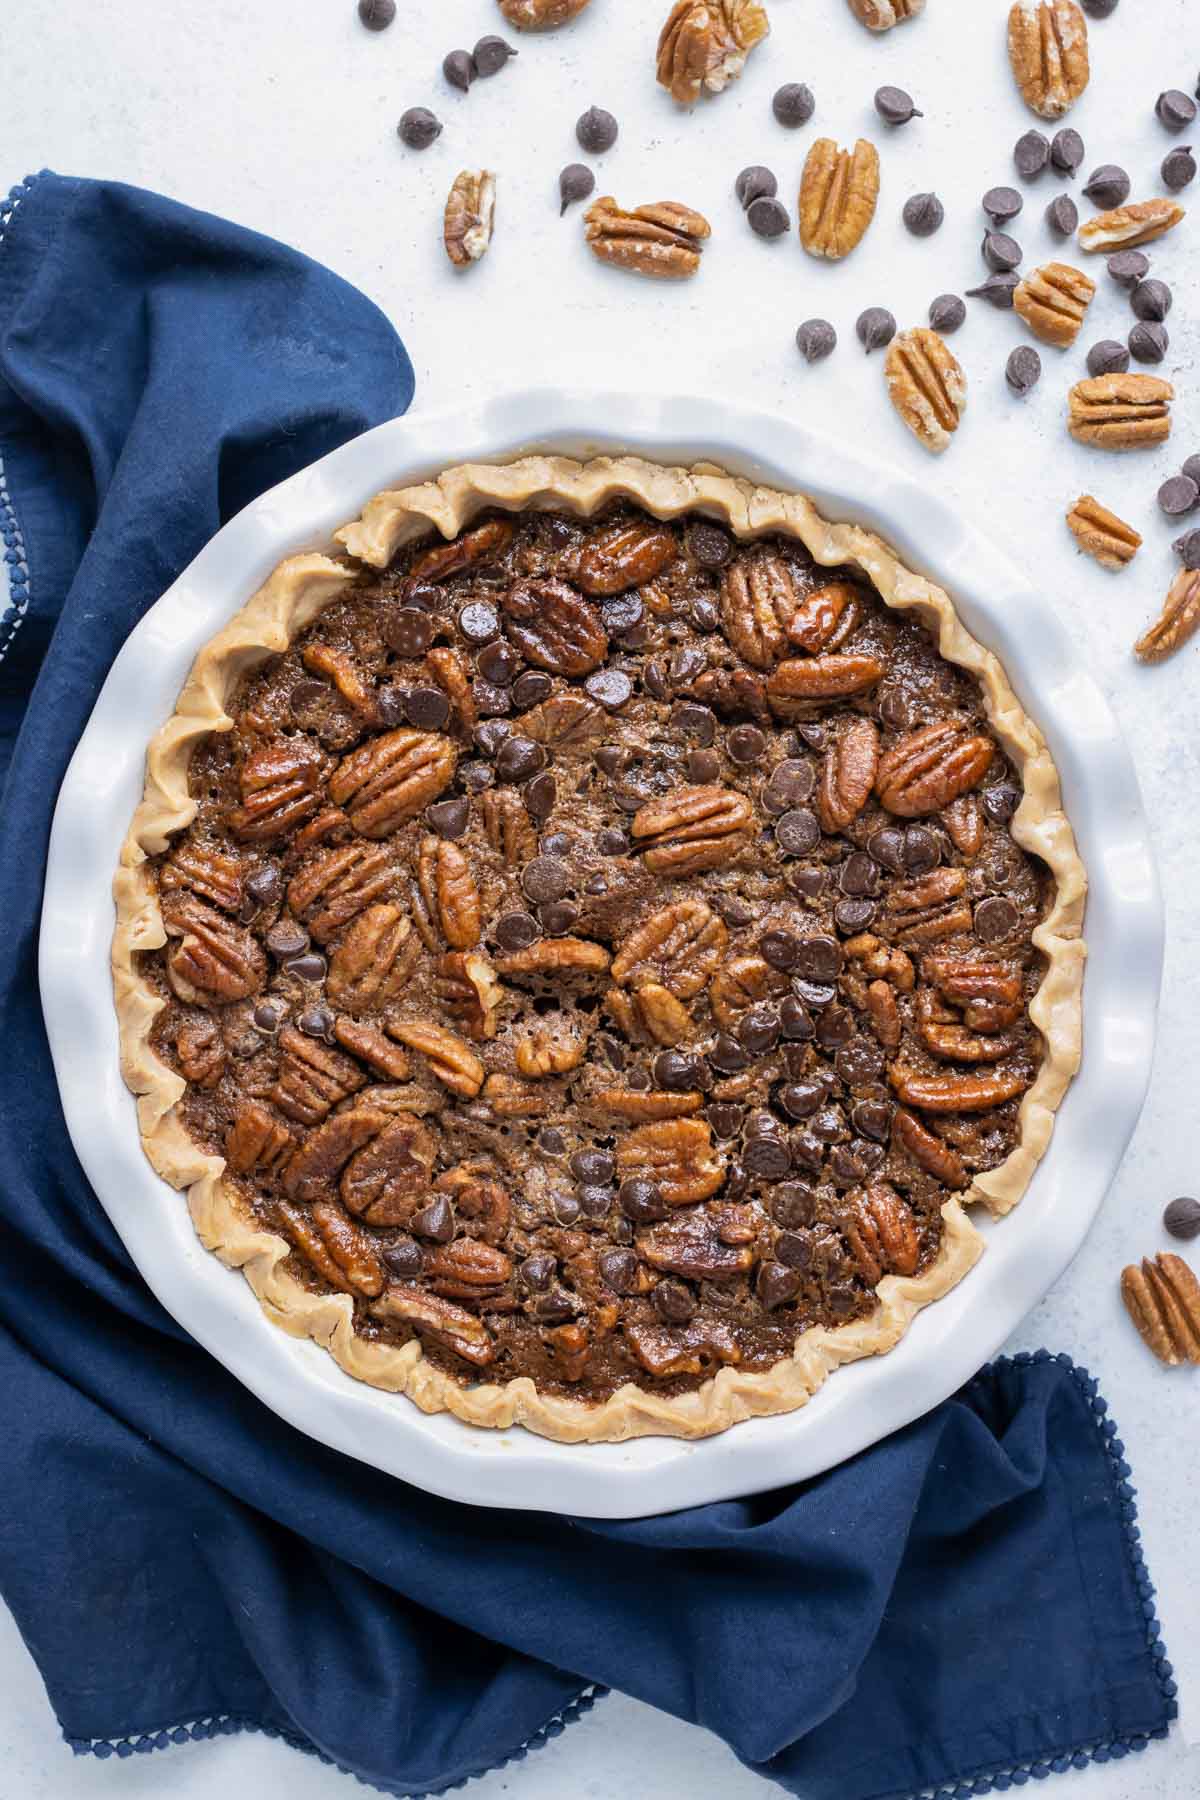 A whole chocolate pecan pie is shown on the counter.